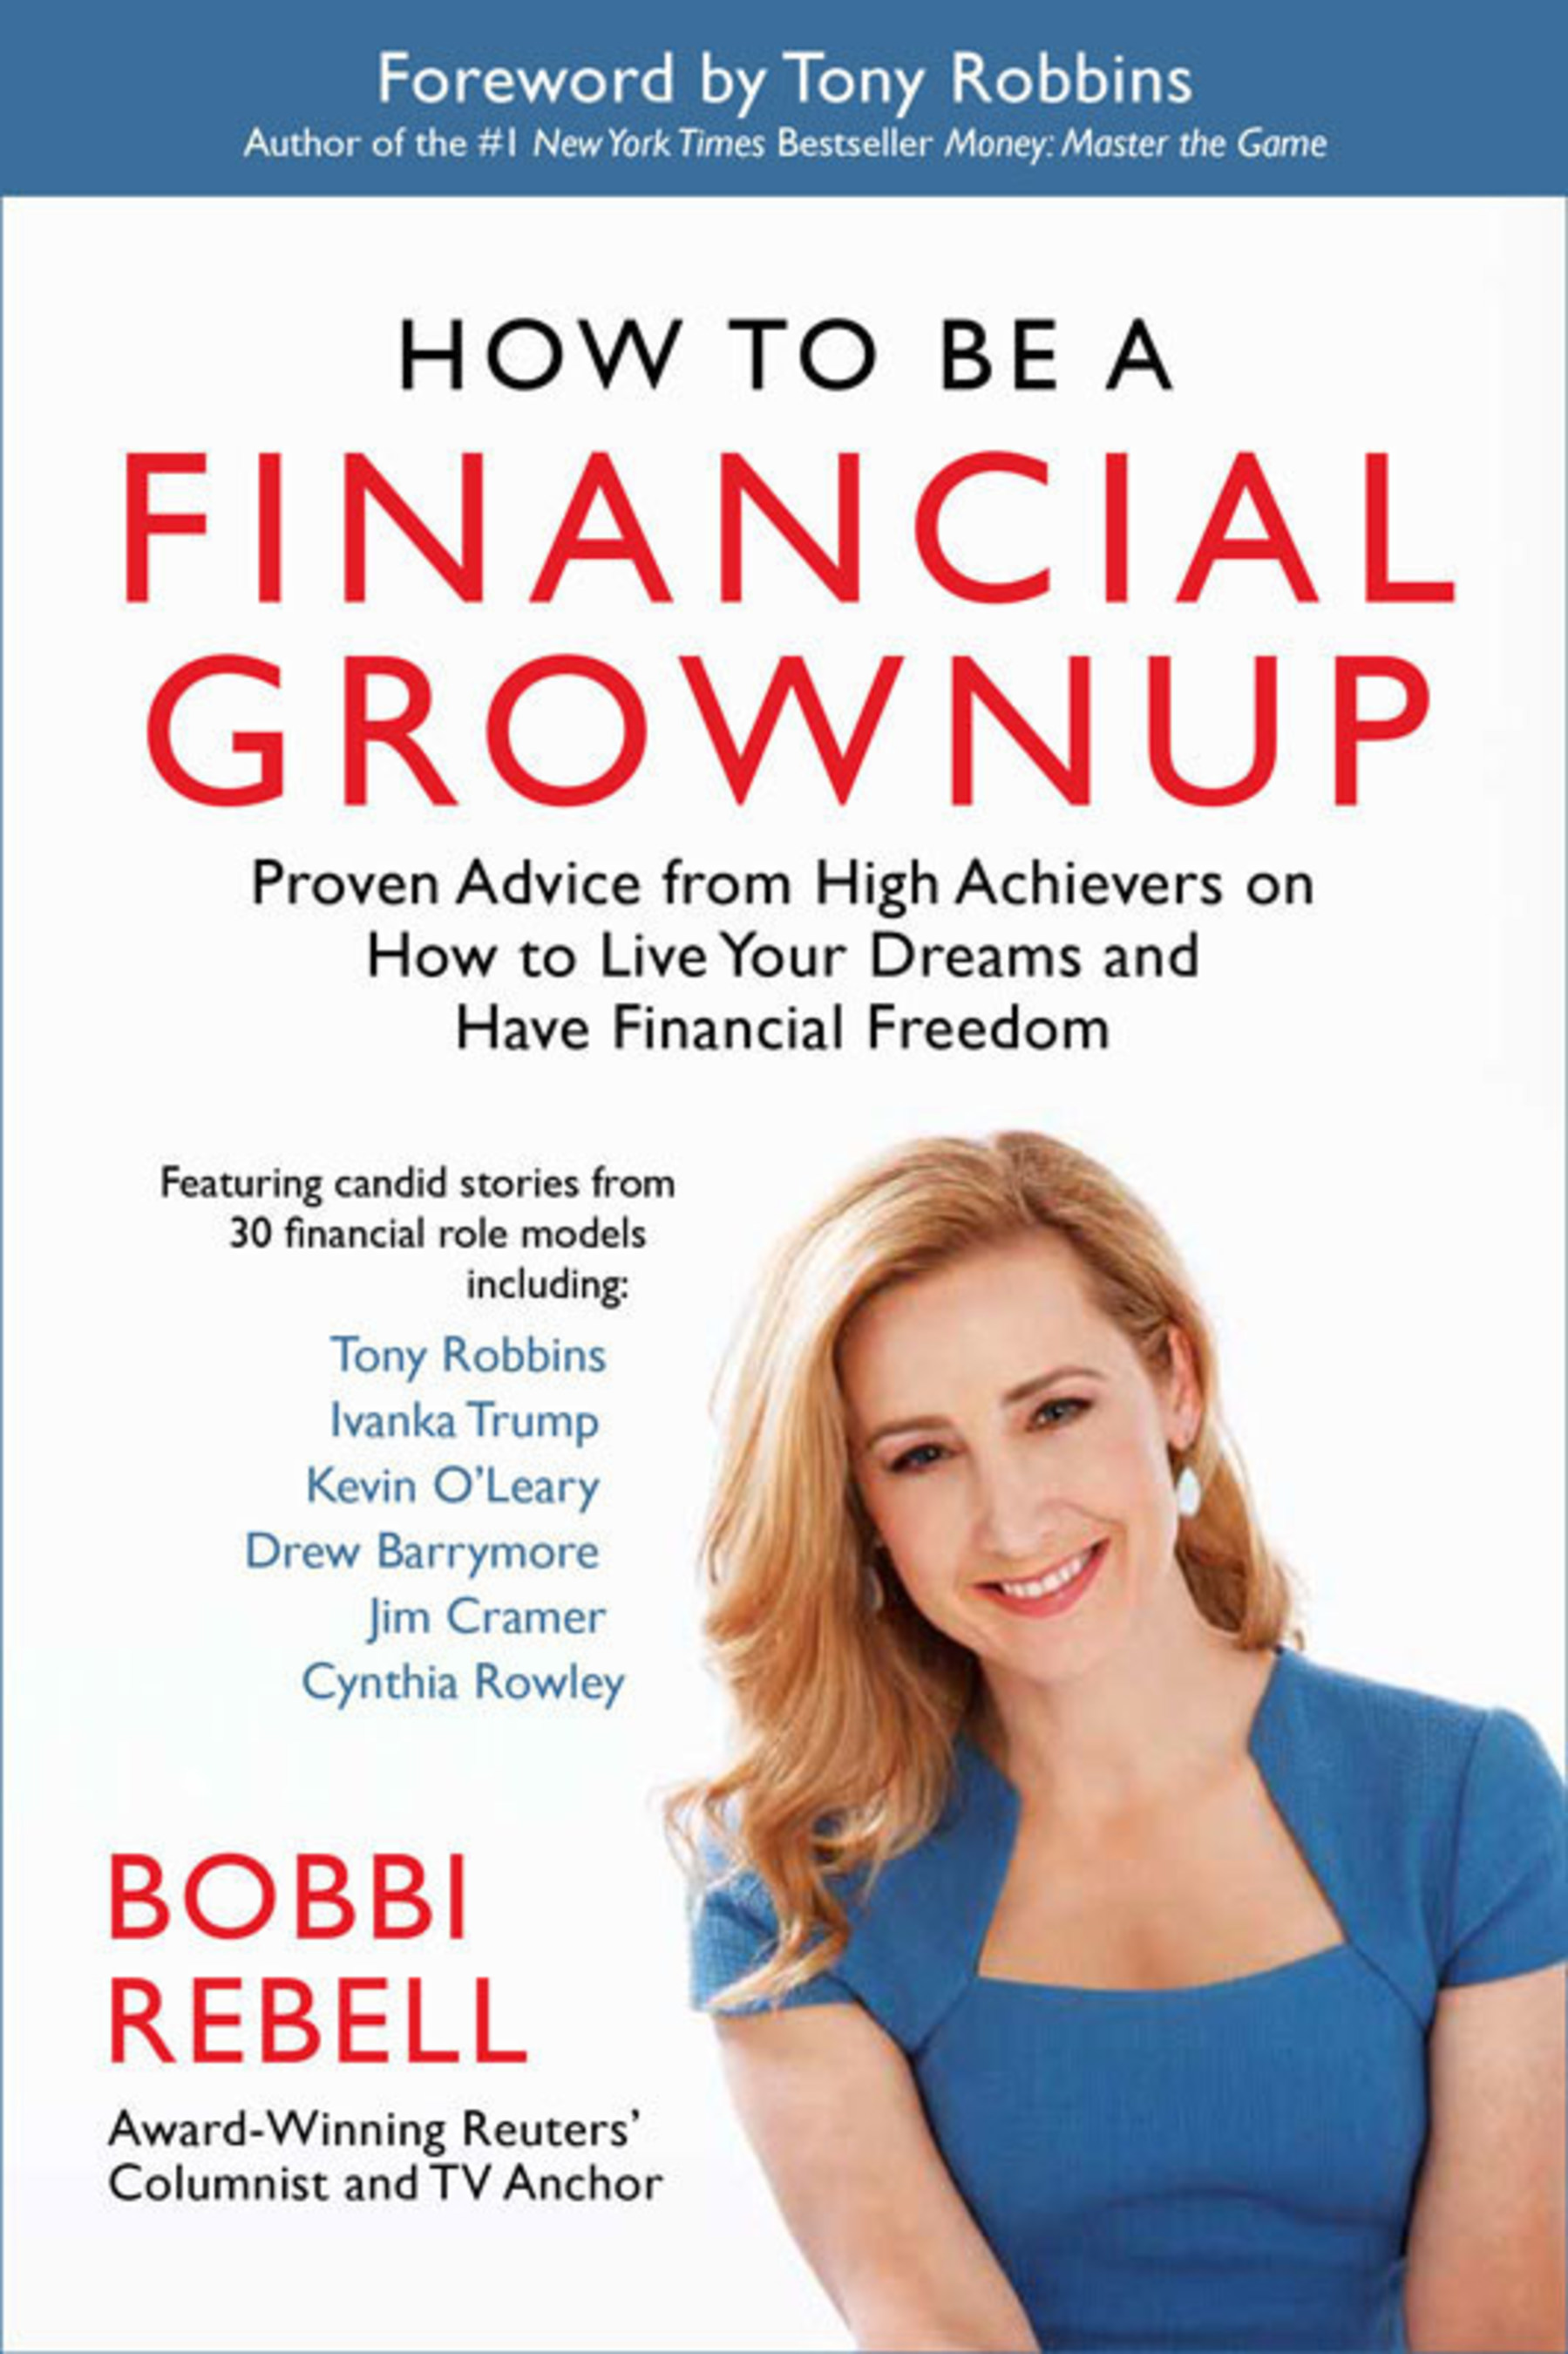 How to Be a Financial Grownup by Bobbi Rebell, Foreword by Tony Robbins